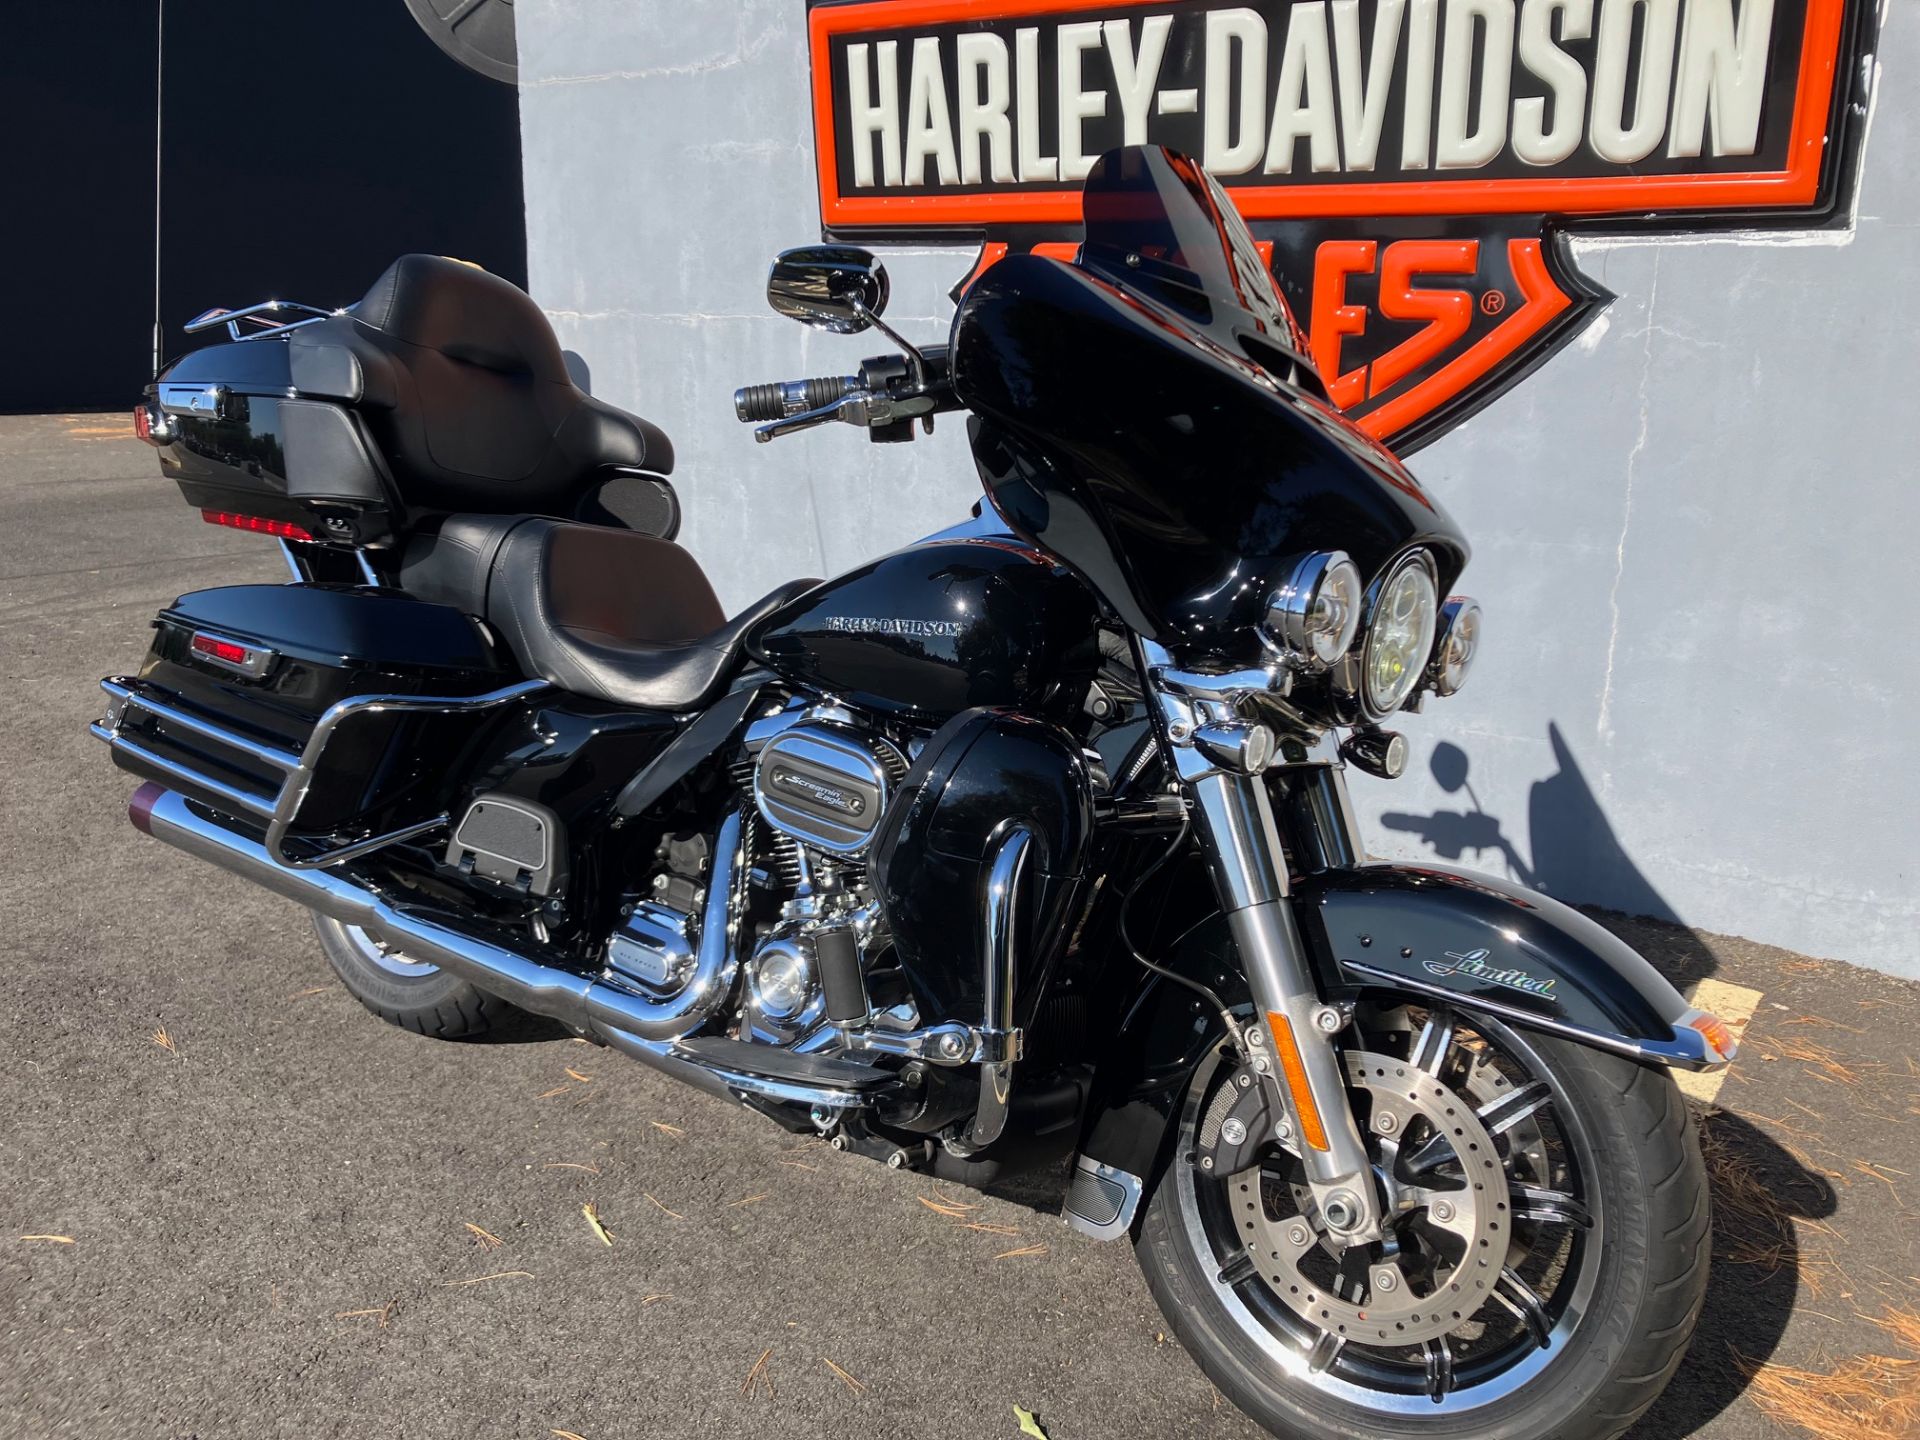 2018 Harley-Davidson ULTRA LIMITED in West Long Branch, New Jersey - Photo 2